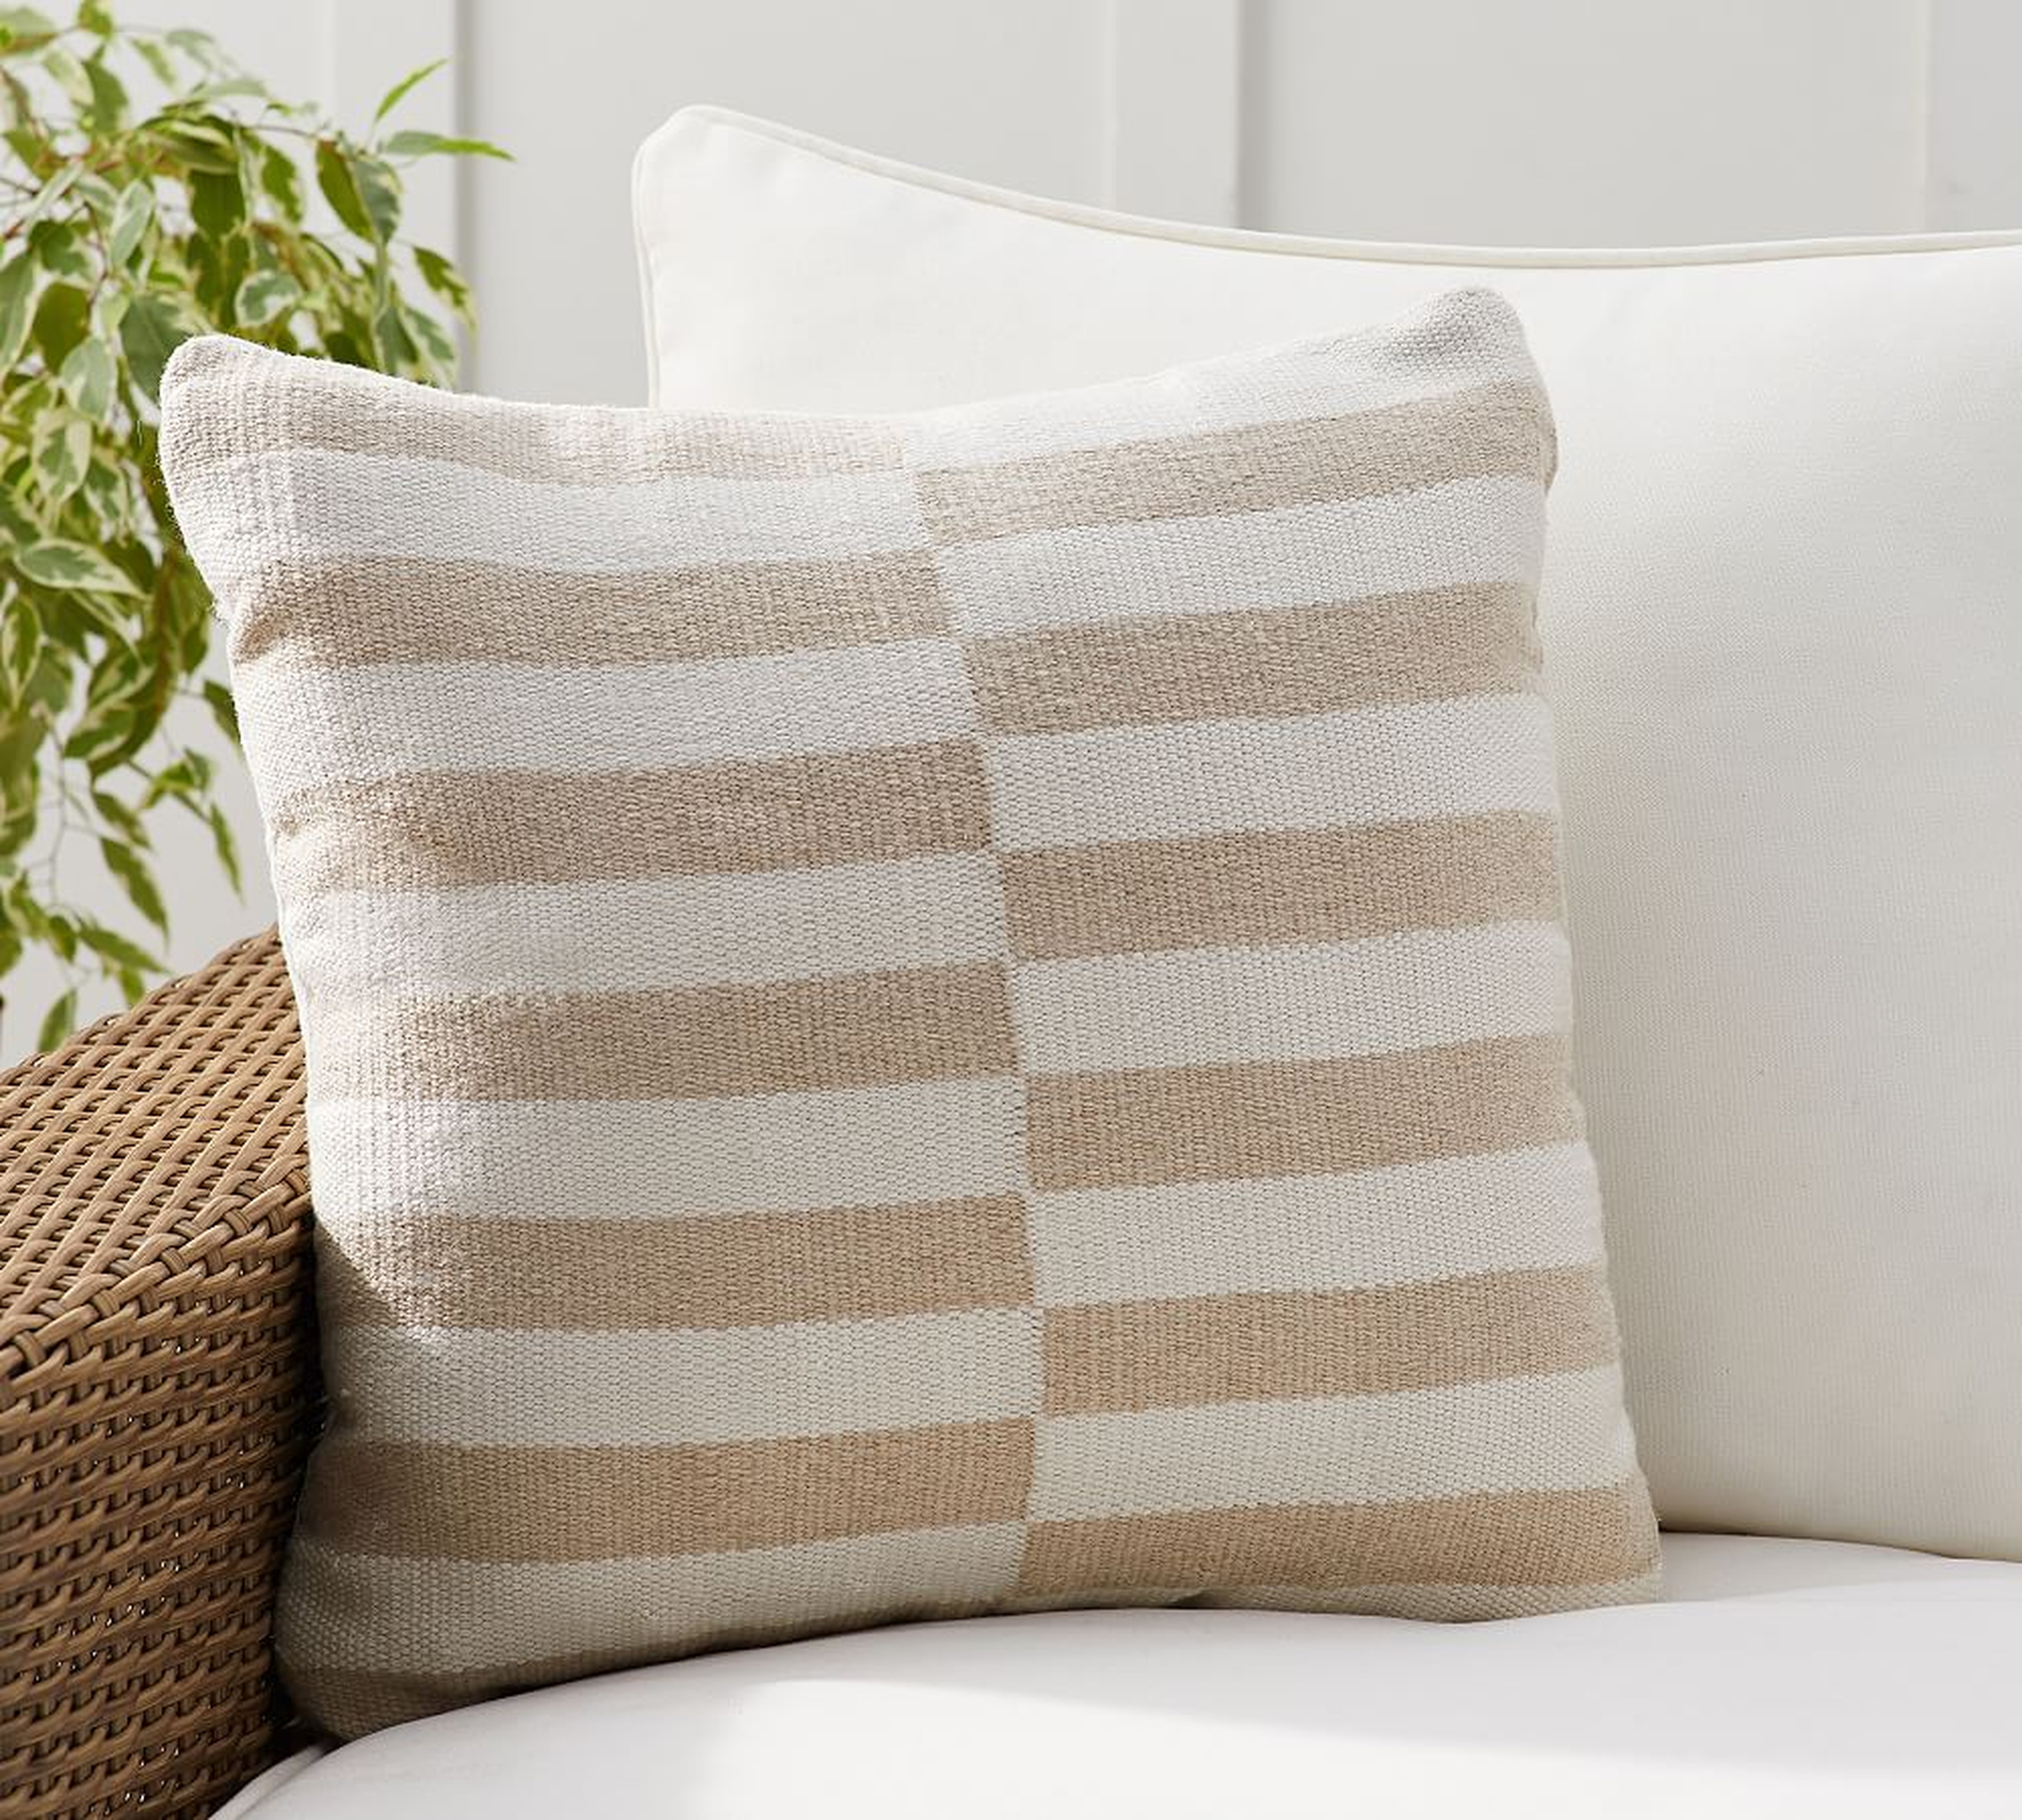 Skye Eco-Friendly Textured Indoor/Outdoor Pillow, 20 x 20", Neutral/Ivory - Pottery Barn